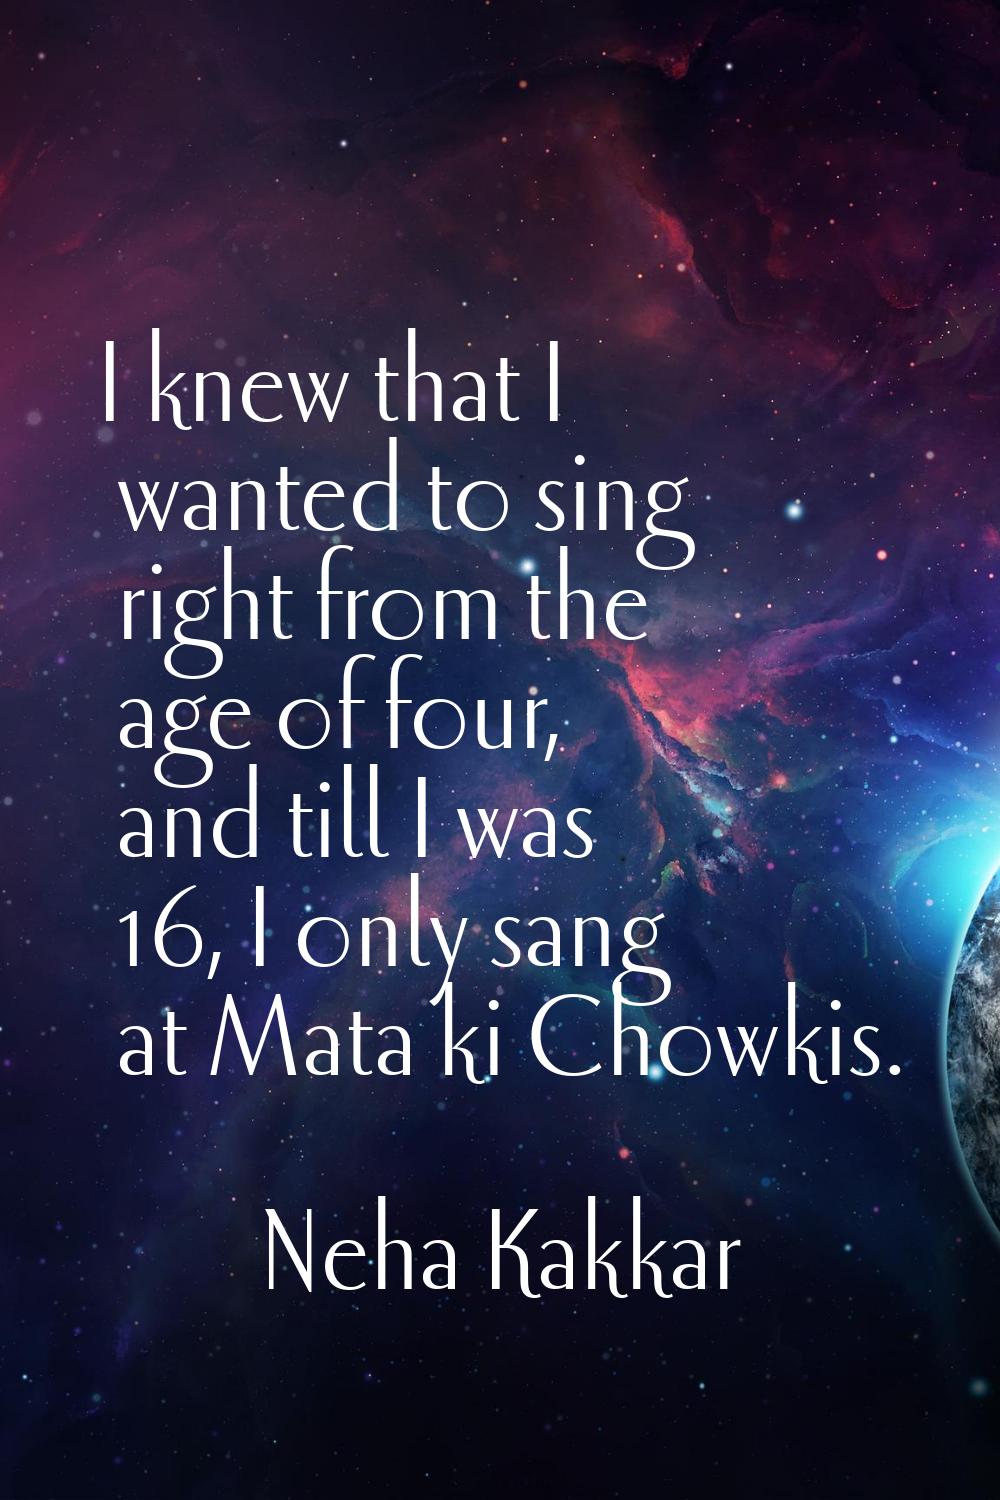 I knew that I wanted to sing right from the age of four, and till I was 16, I only sang at Mata ki 